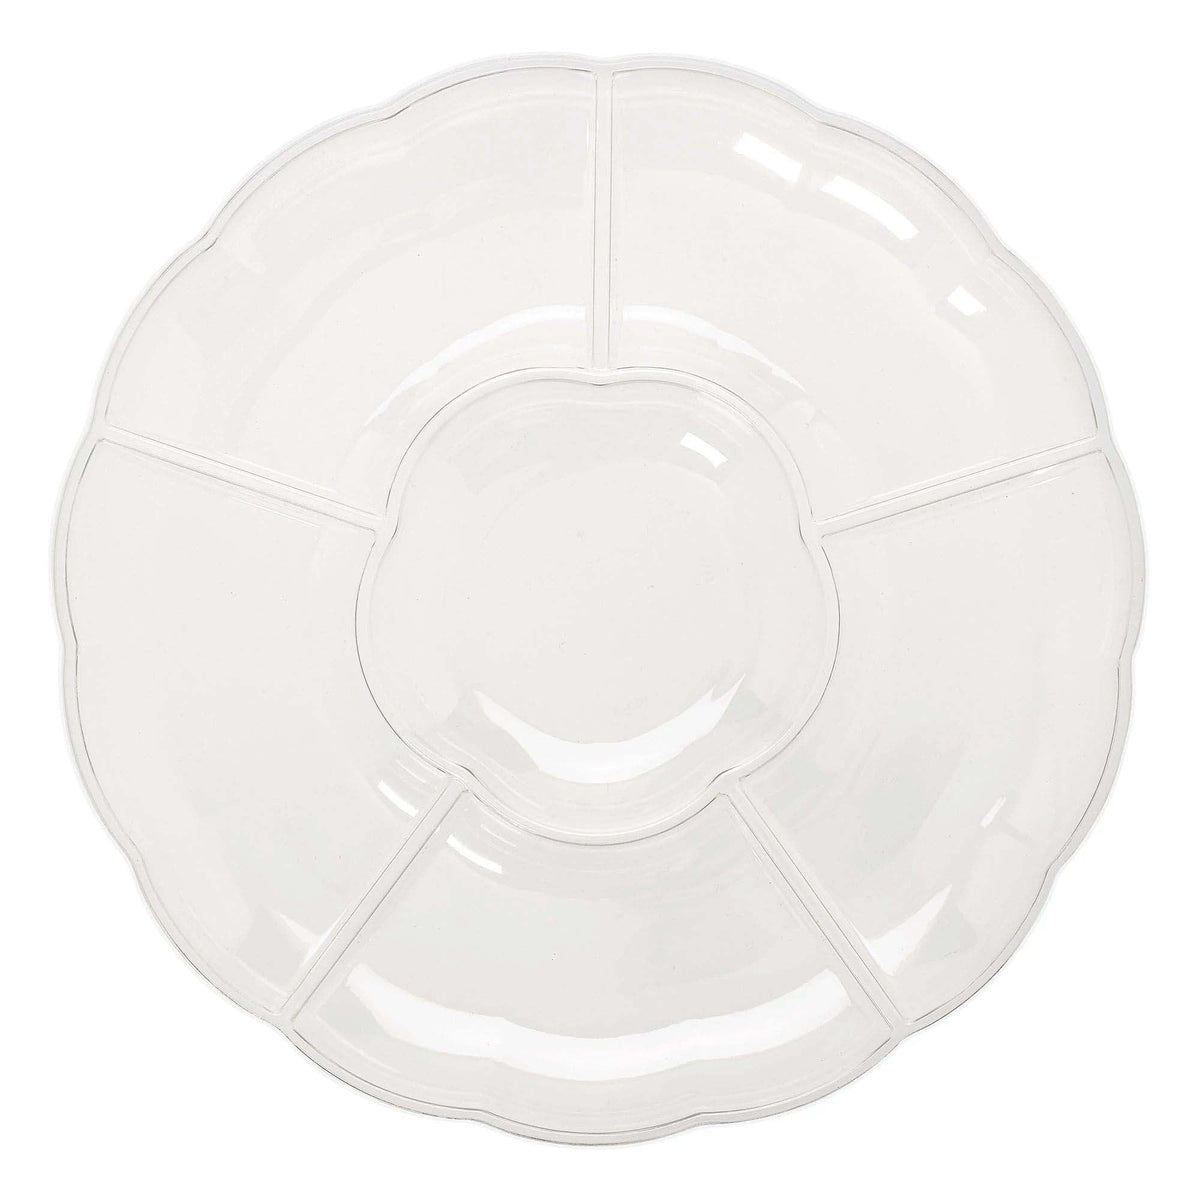 AMSCAN CA Disposable-Plasticware Clear Recyclable Plastic Tray with Compartment, 16 Inches, 1 Count 192937433843